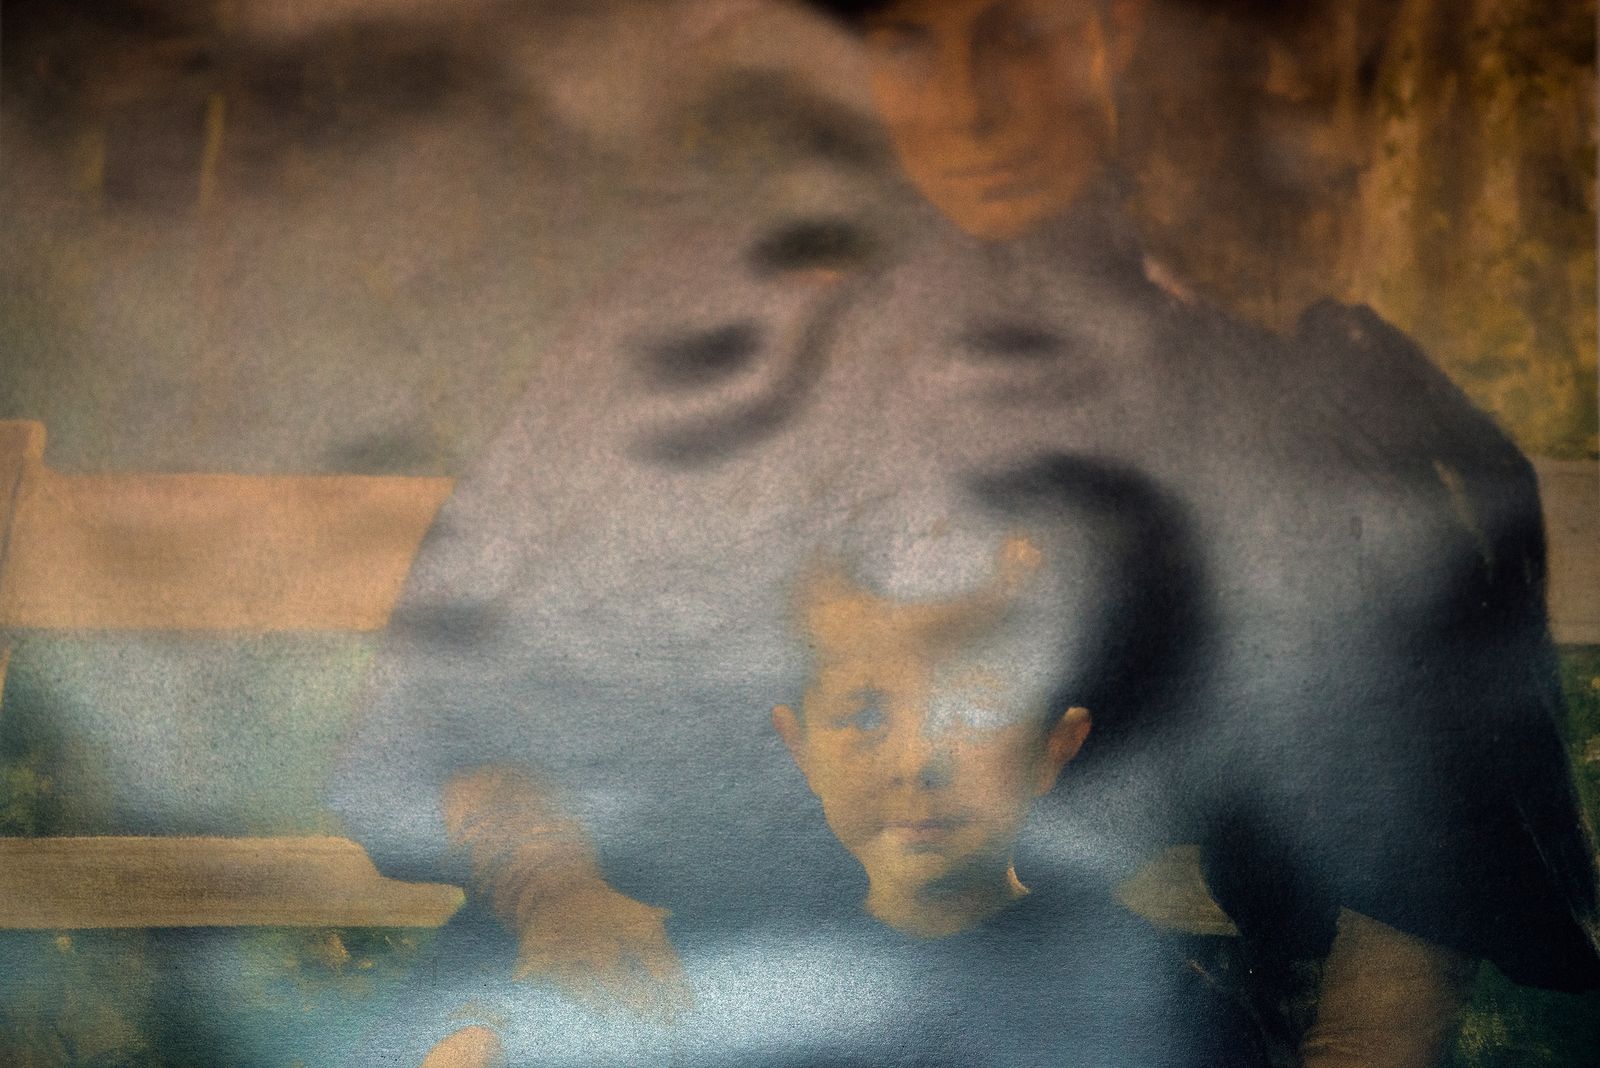 © Panos Charalampidis + Mary Chairetaki - Image from the second chance photography project